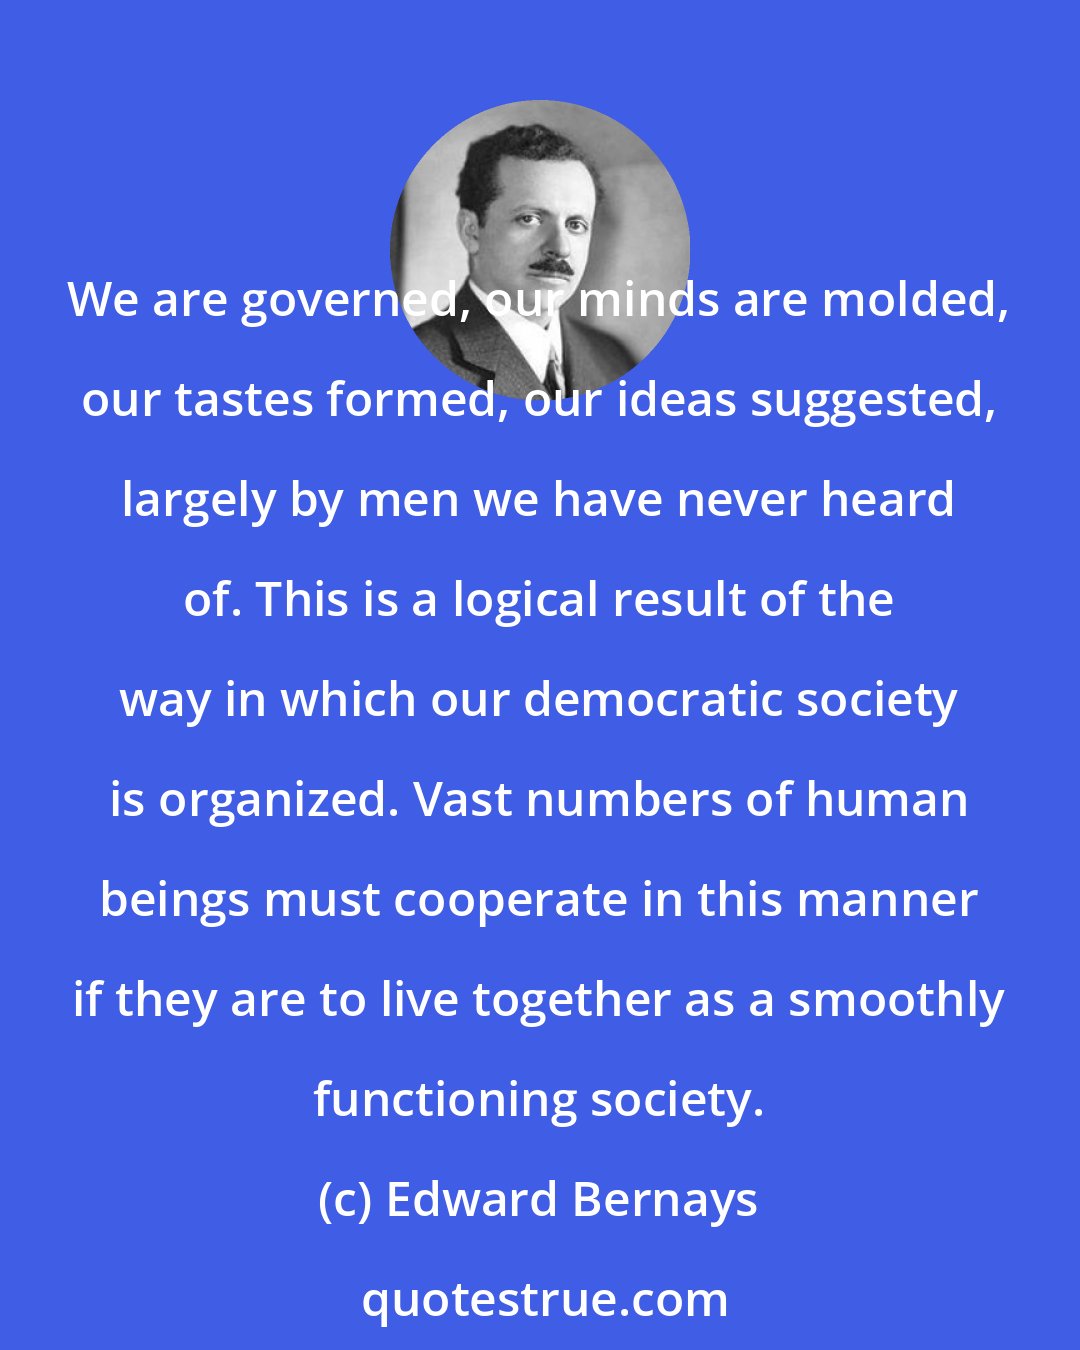 Edward Bernays: We are governed, our minds are molded, our tastes formed, our ideas suggested, largely by men we have never heard of. This is a logical result of the way in which our democratic society is organized. Vast numbers of human beings must cooperate in this manner if they are to live together as a smoothly functioning society.